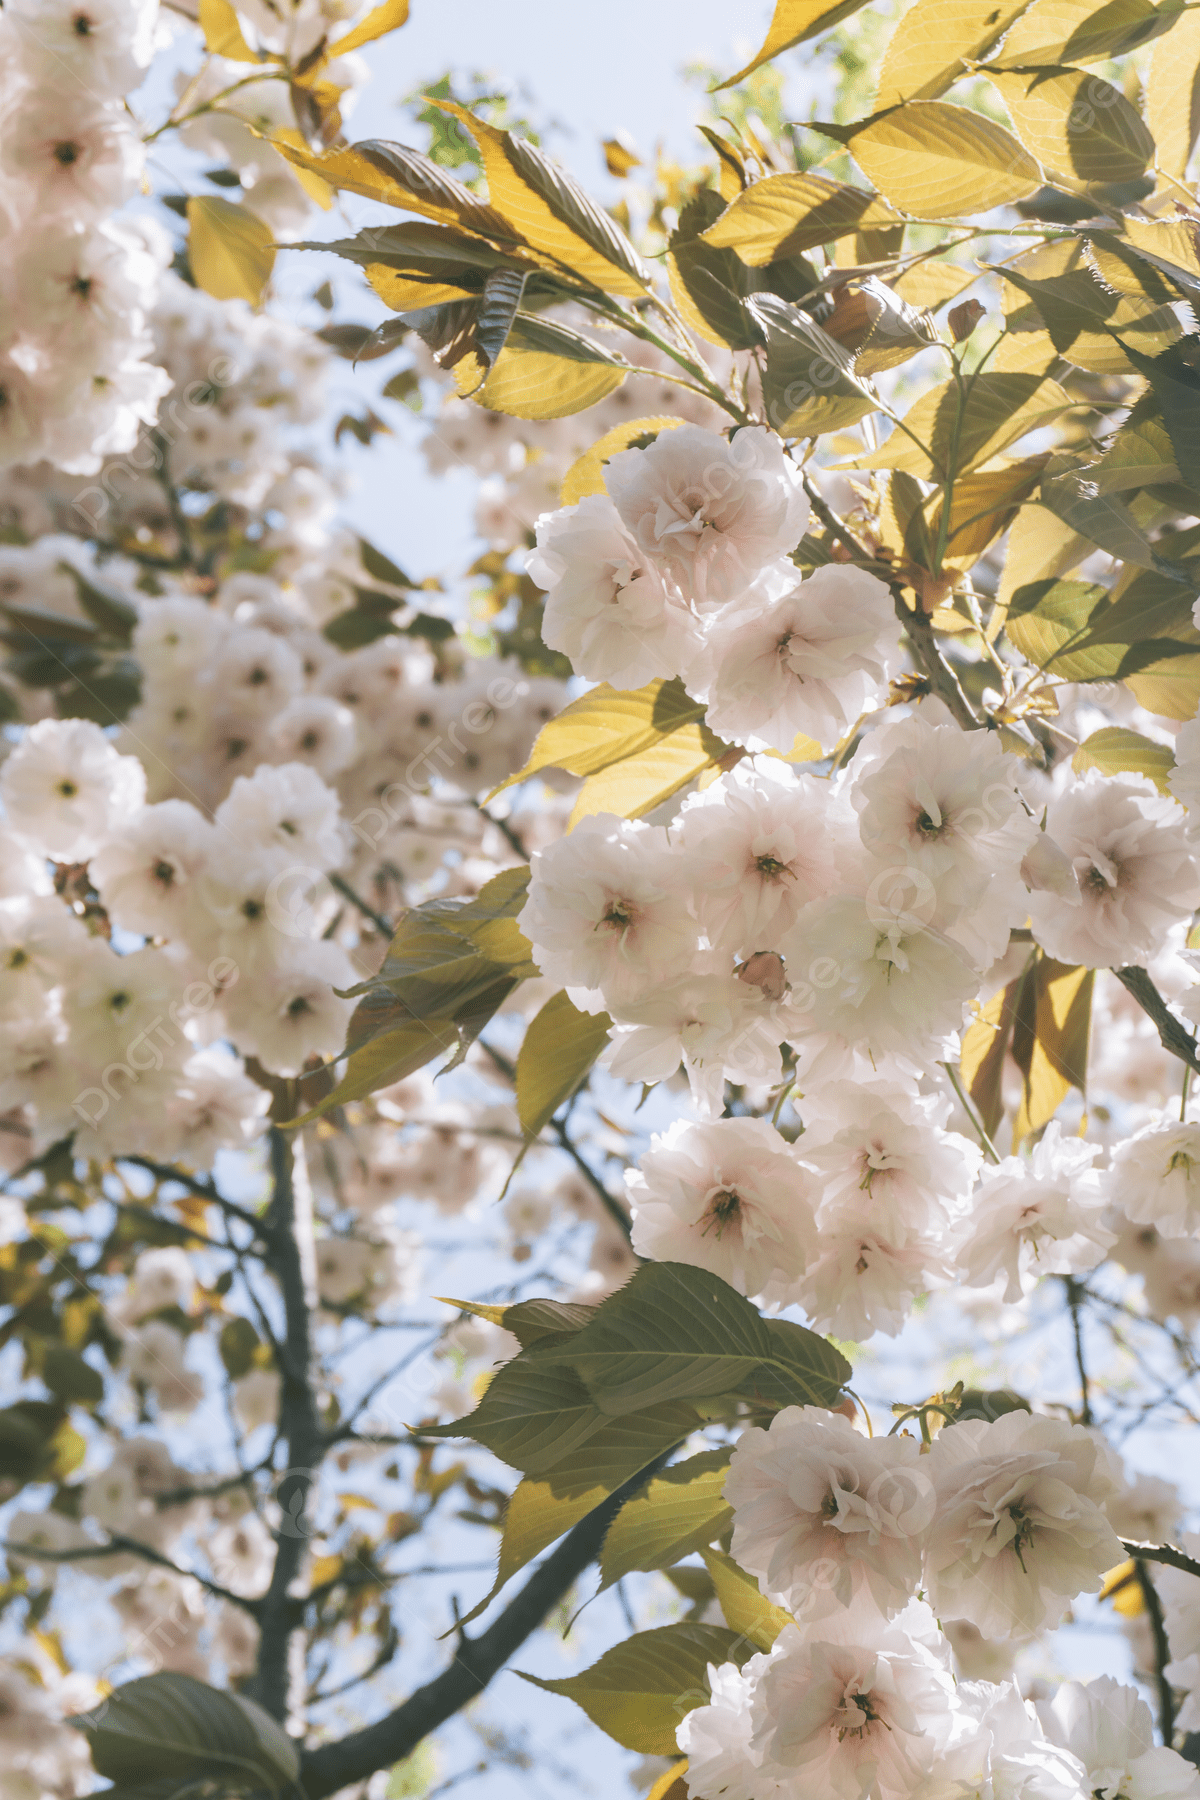 White flowers on a tree with green leaves - Cherry blossom